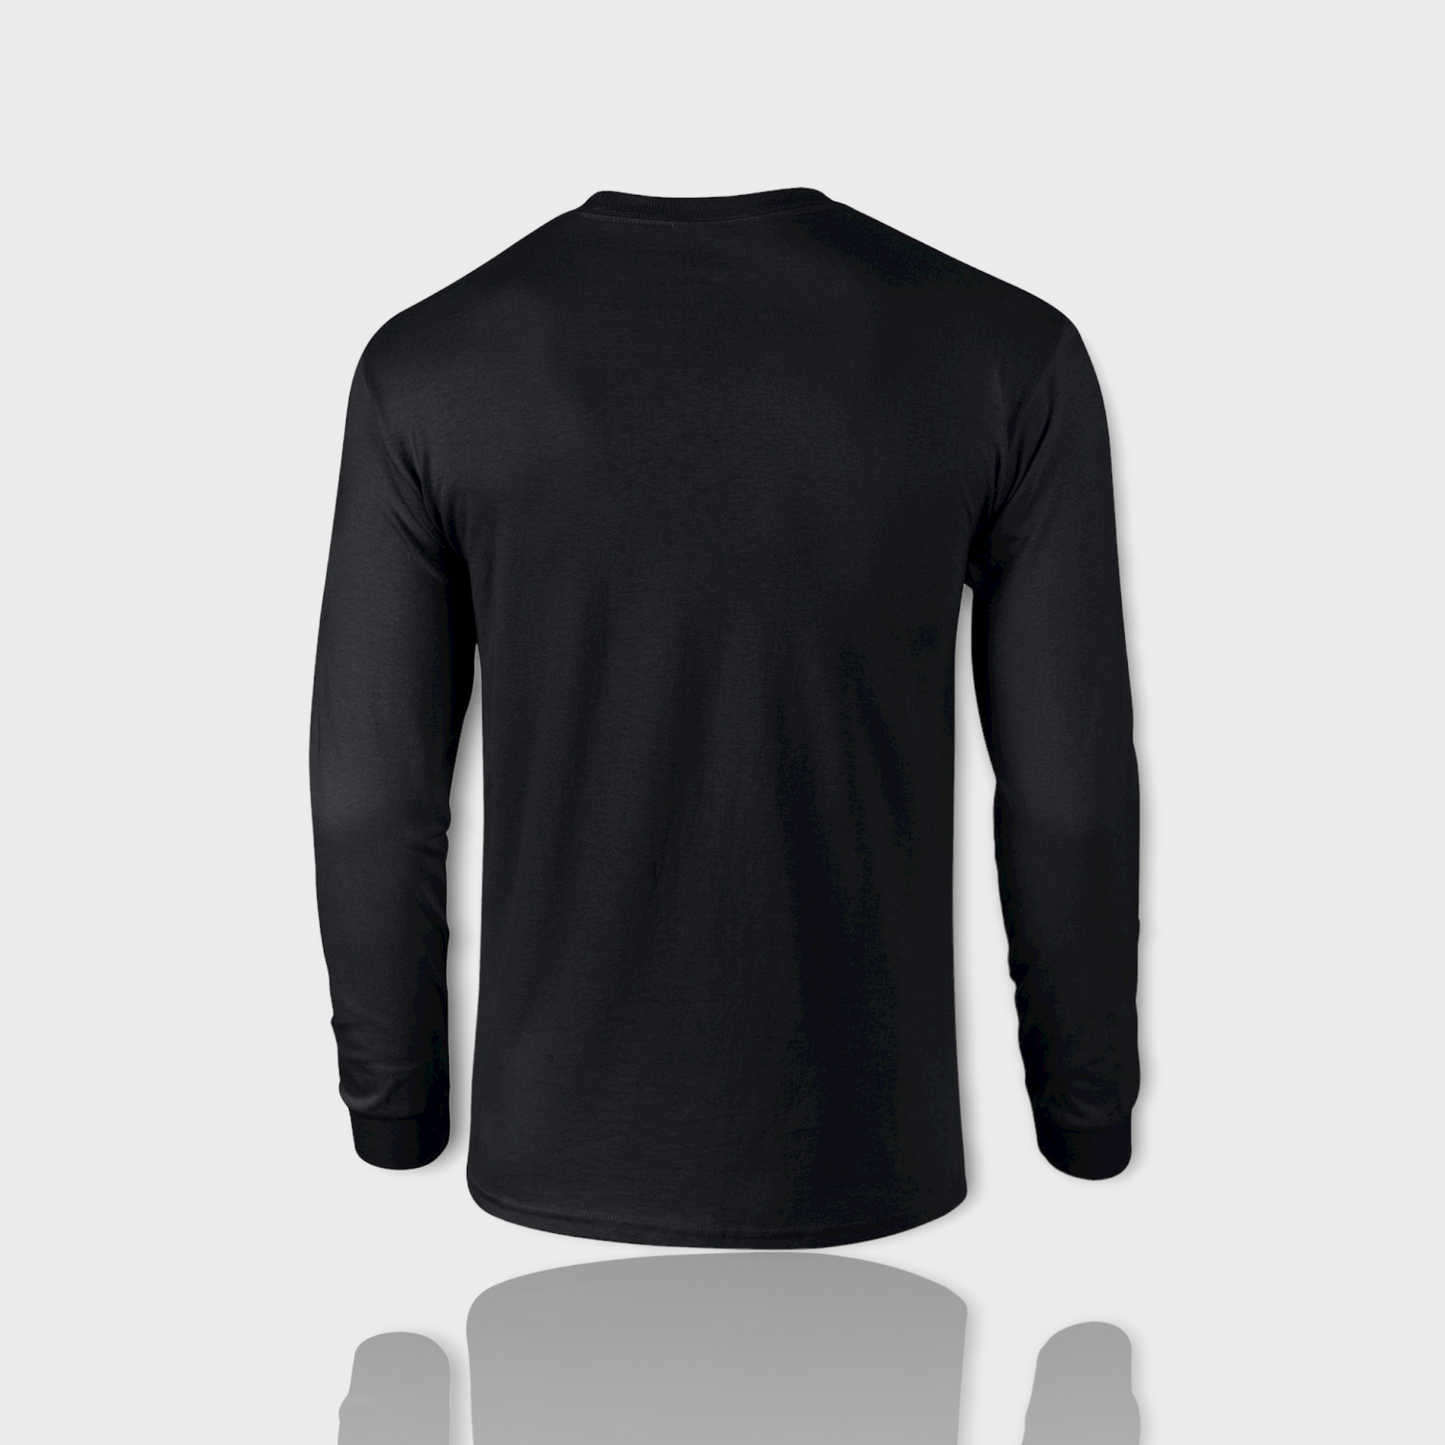 THE ESSENTIAL LONG-SLEEVE SHIRT - BLACK - Lineage Athletics